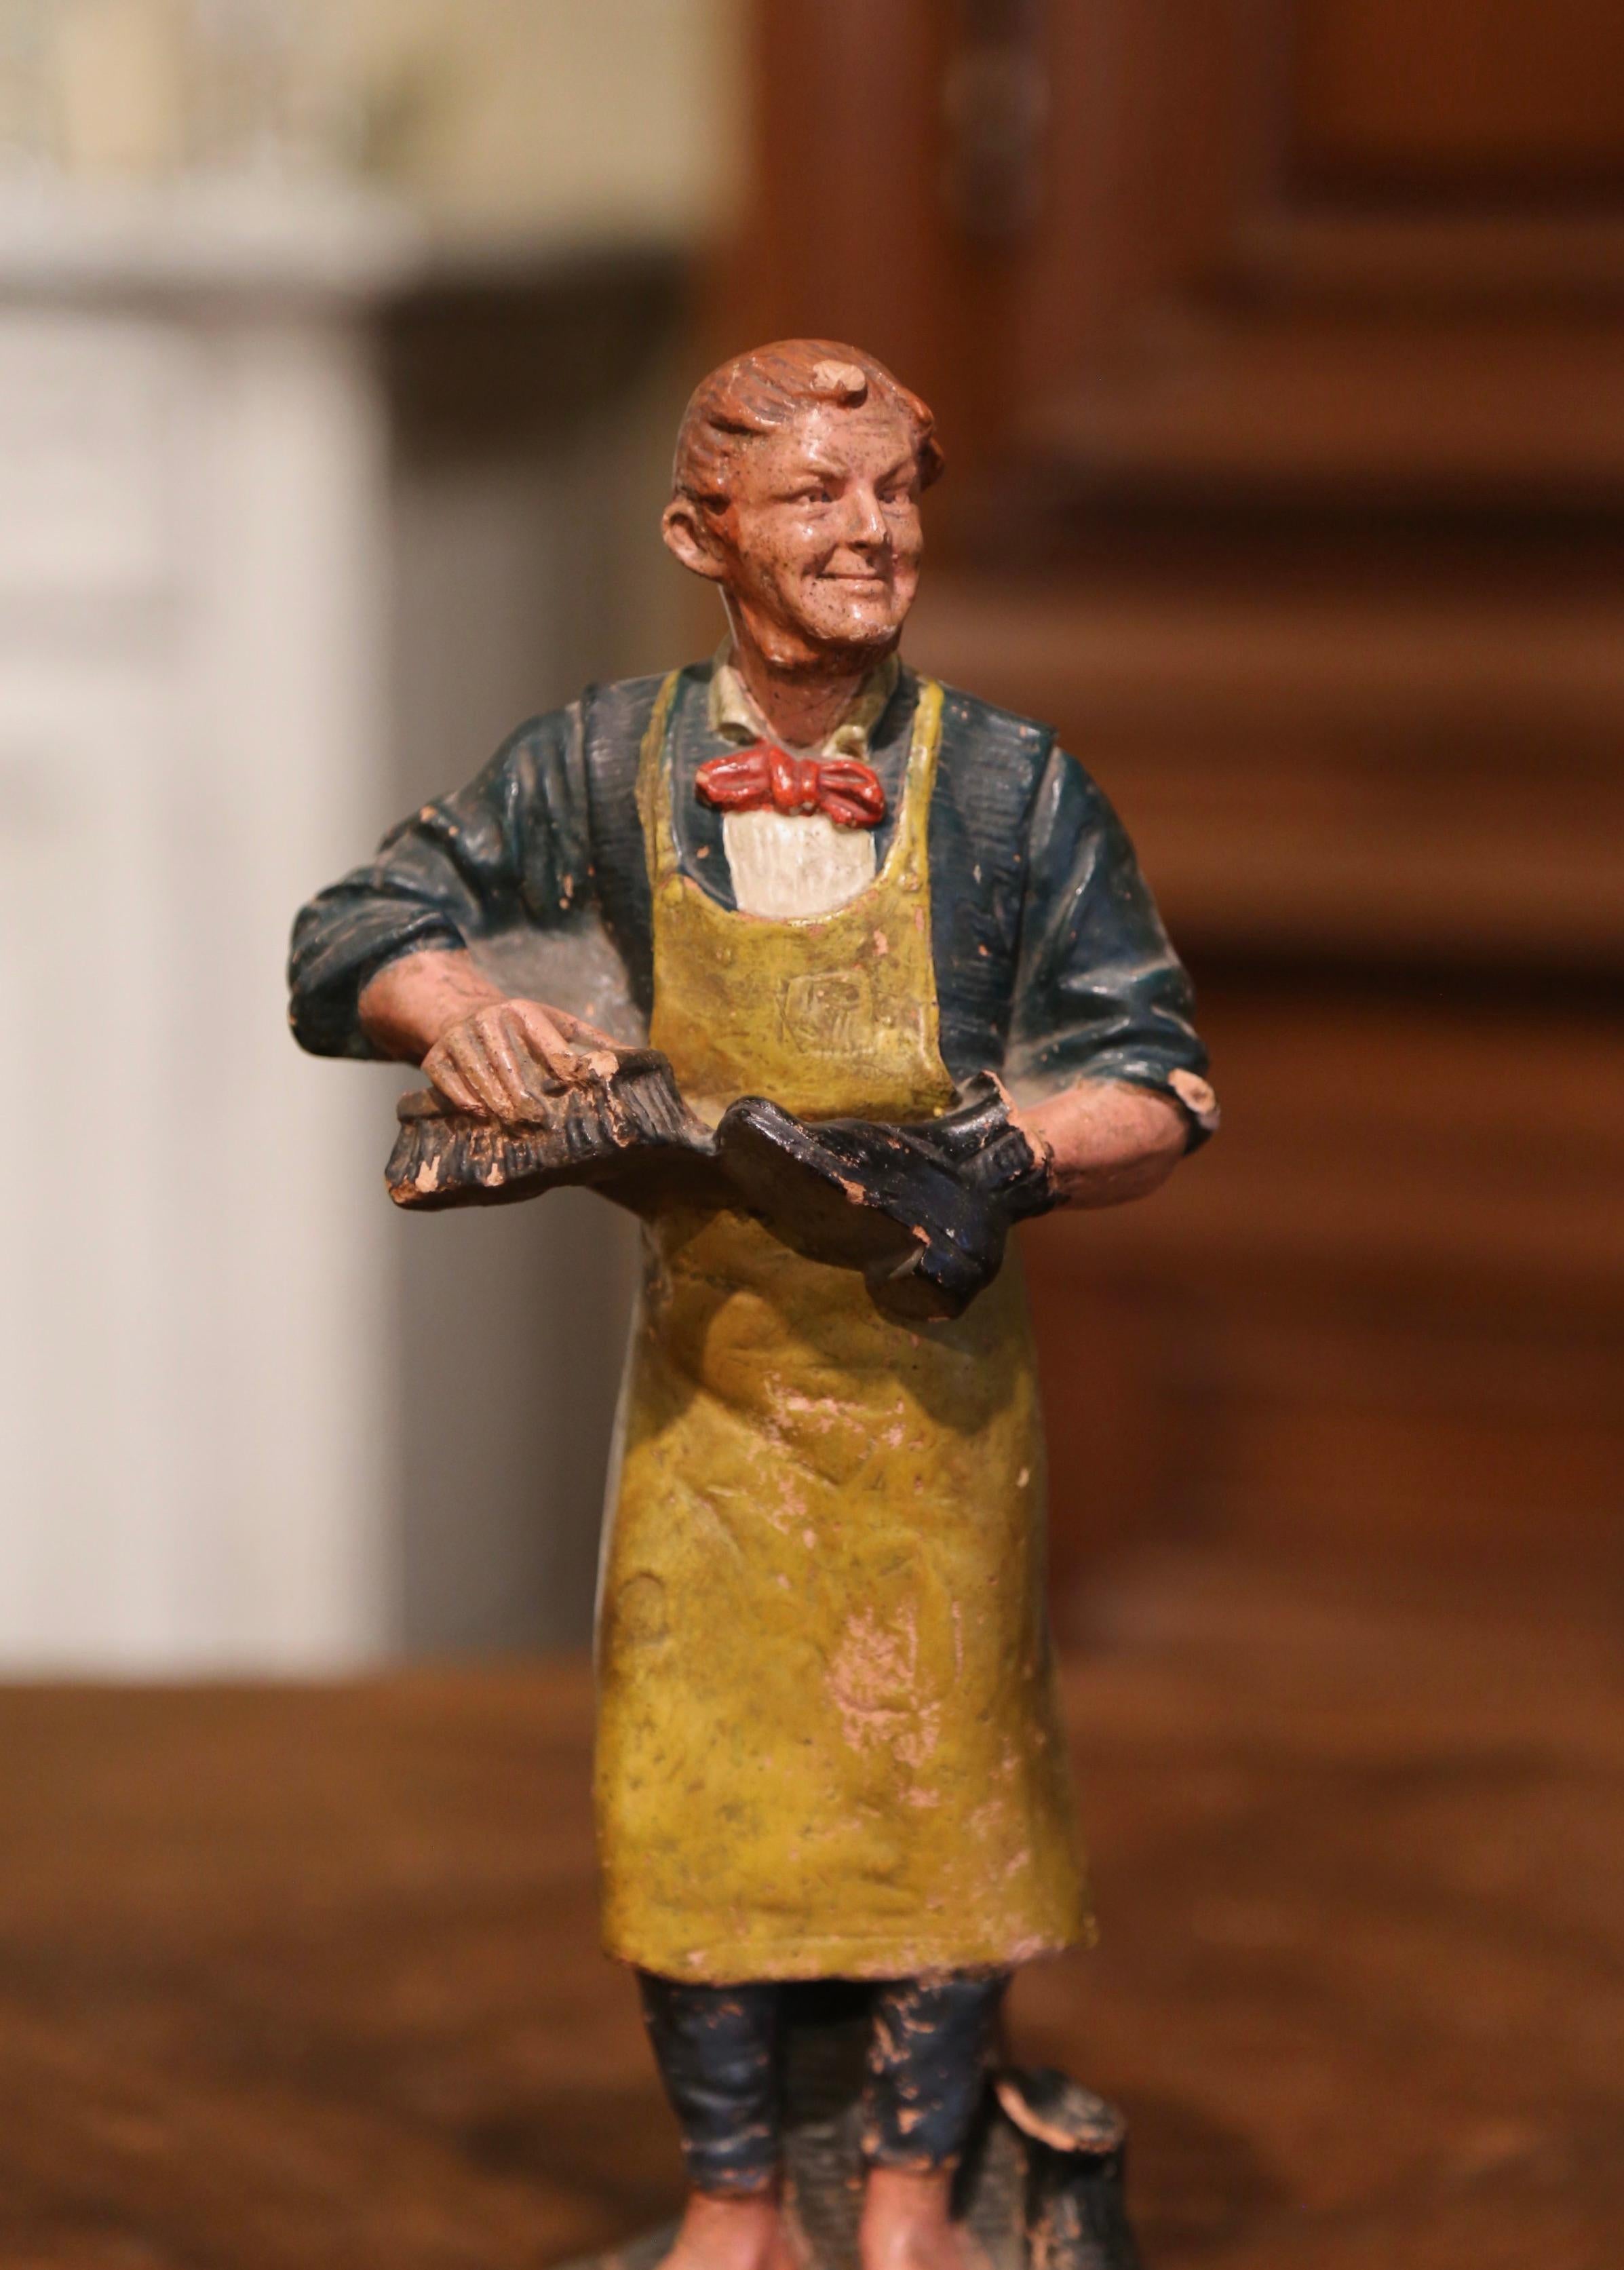 Place this colorful antique figurine on a shelf or convert it into a table lamp; crafted in France, circa 1880, the terracotta figure depicts a man in 19th century clothing, cobbling shoes. It's an endearing piece which captures the charm of French